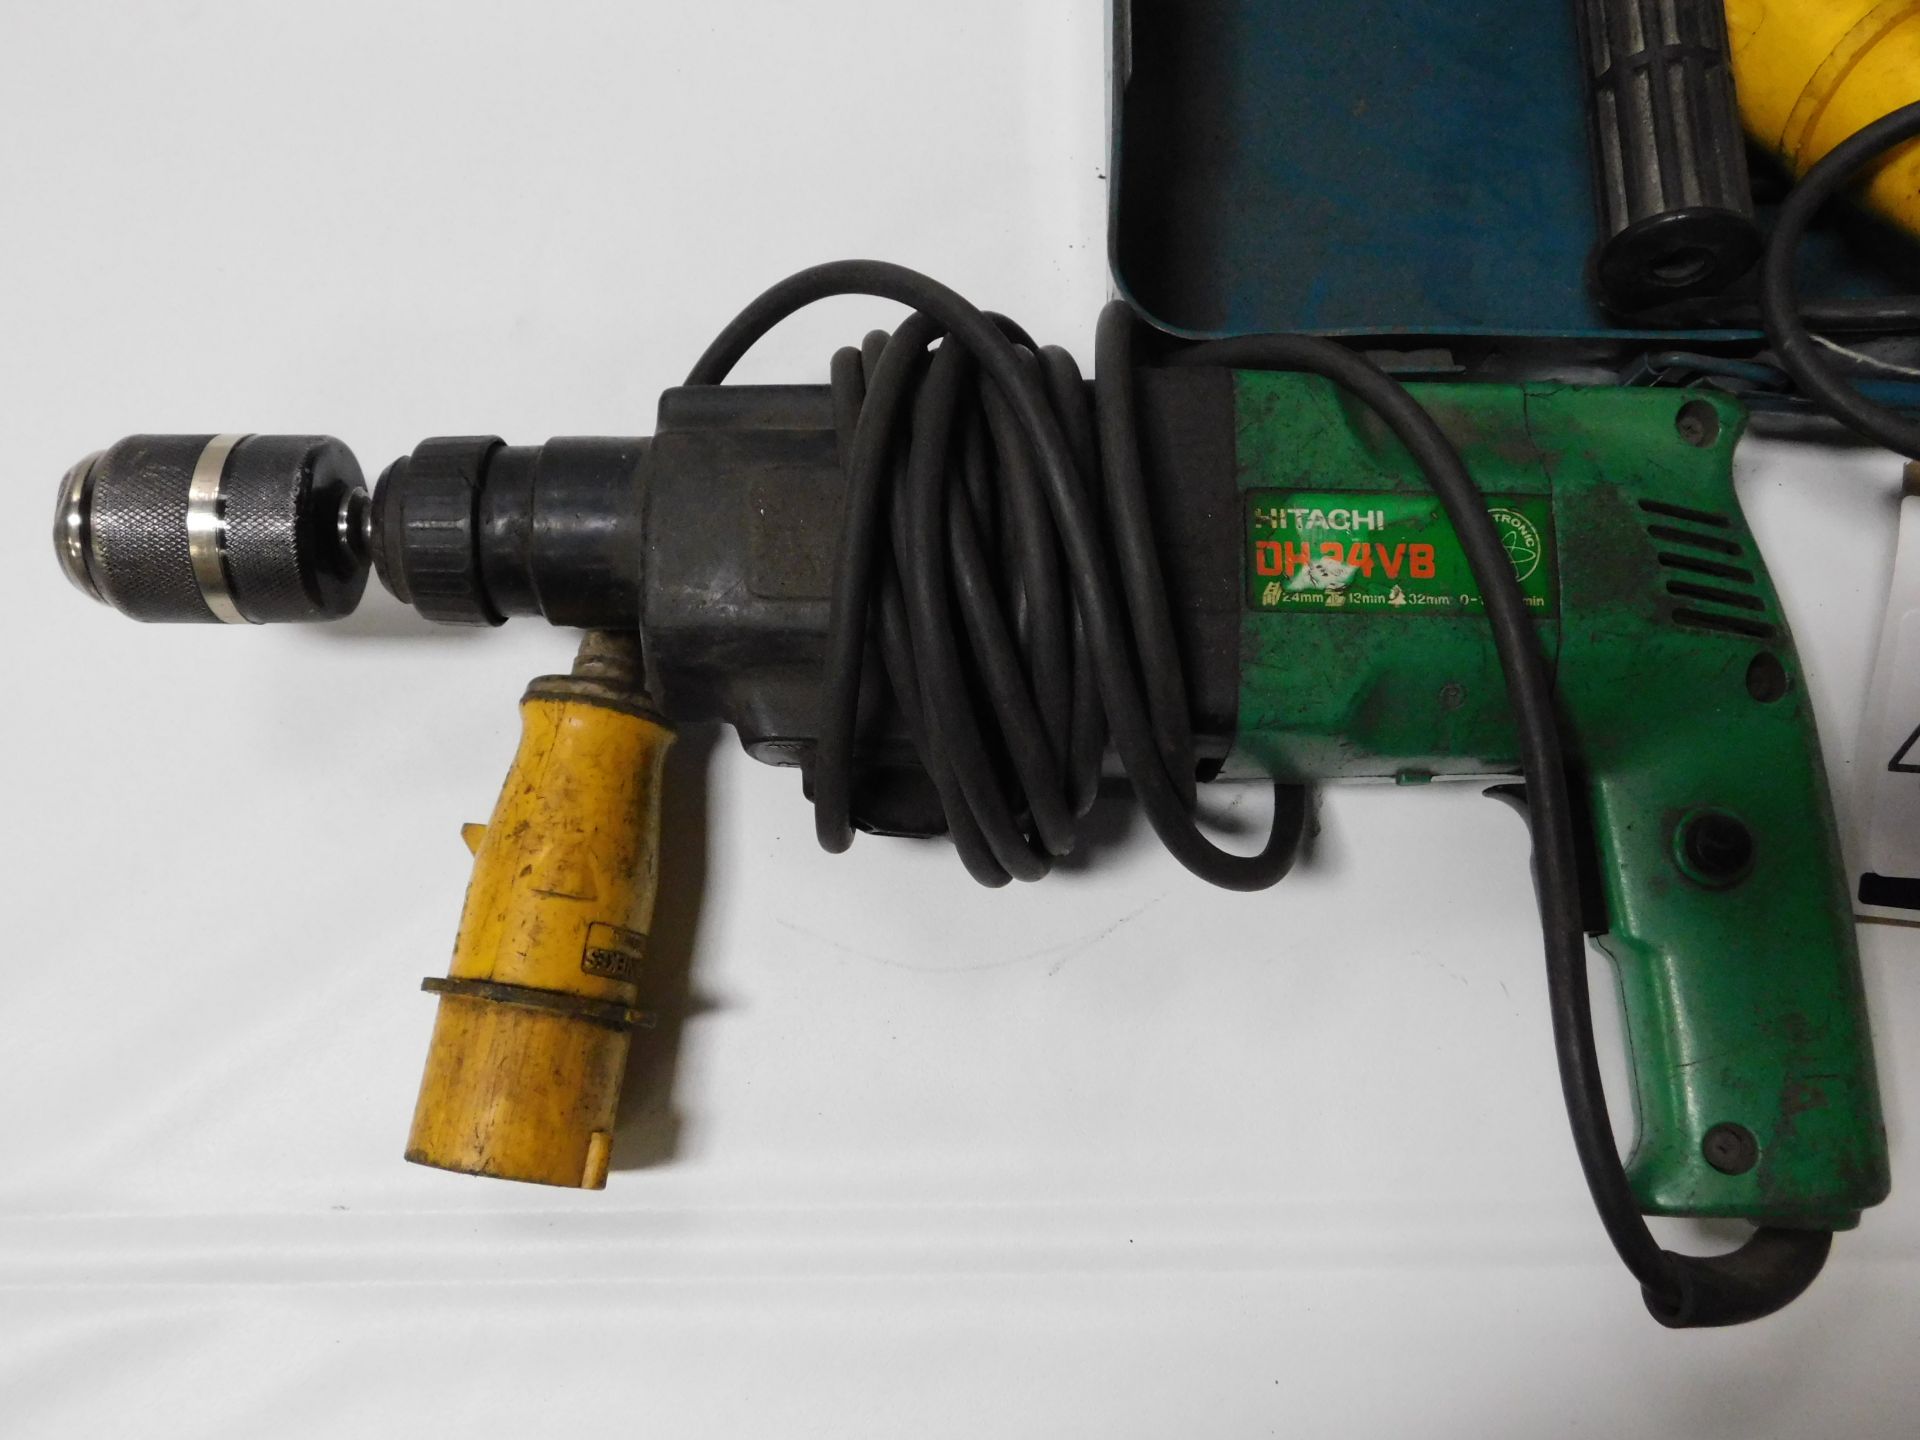 Hitachi DH 24VB Hammer Drill, 110v & Another, Similar (Location Brentwood. Please Refer to General - Image 3 of 4